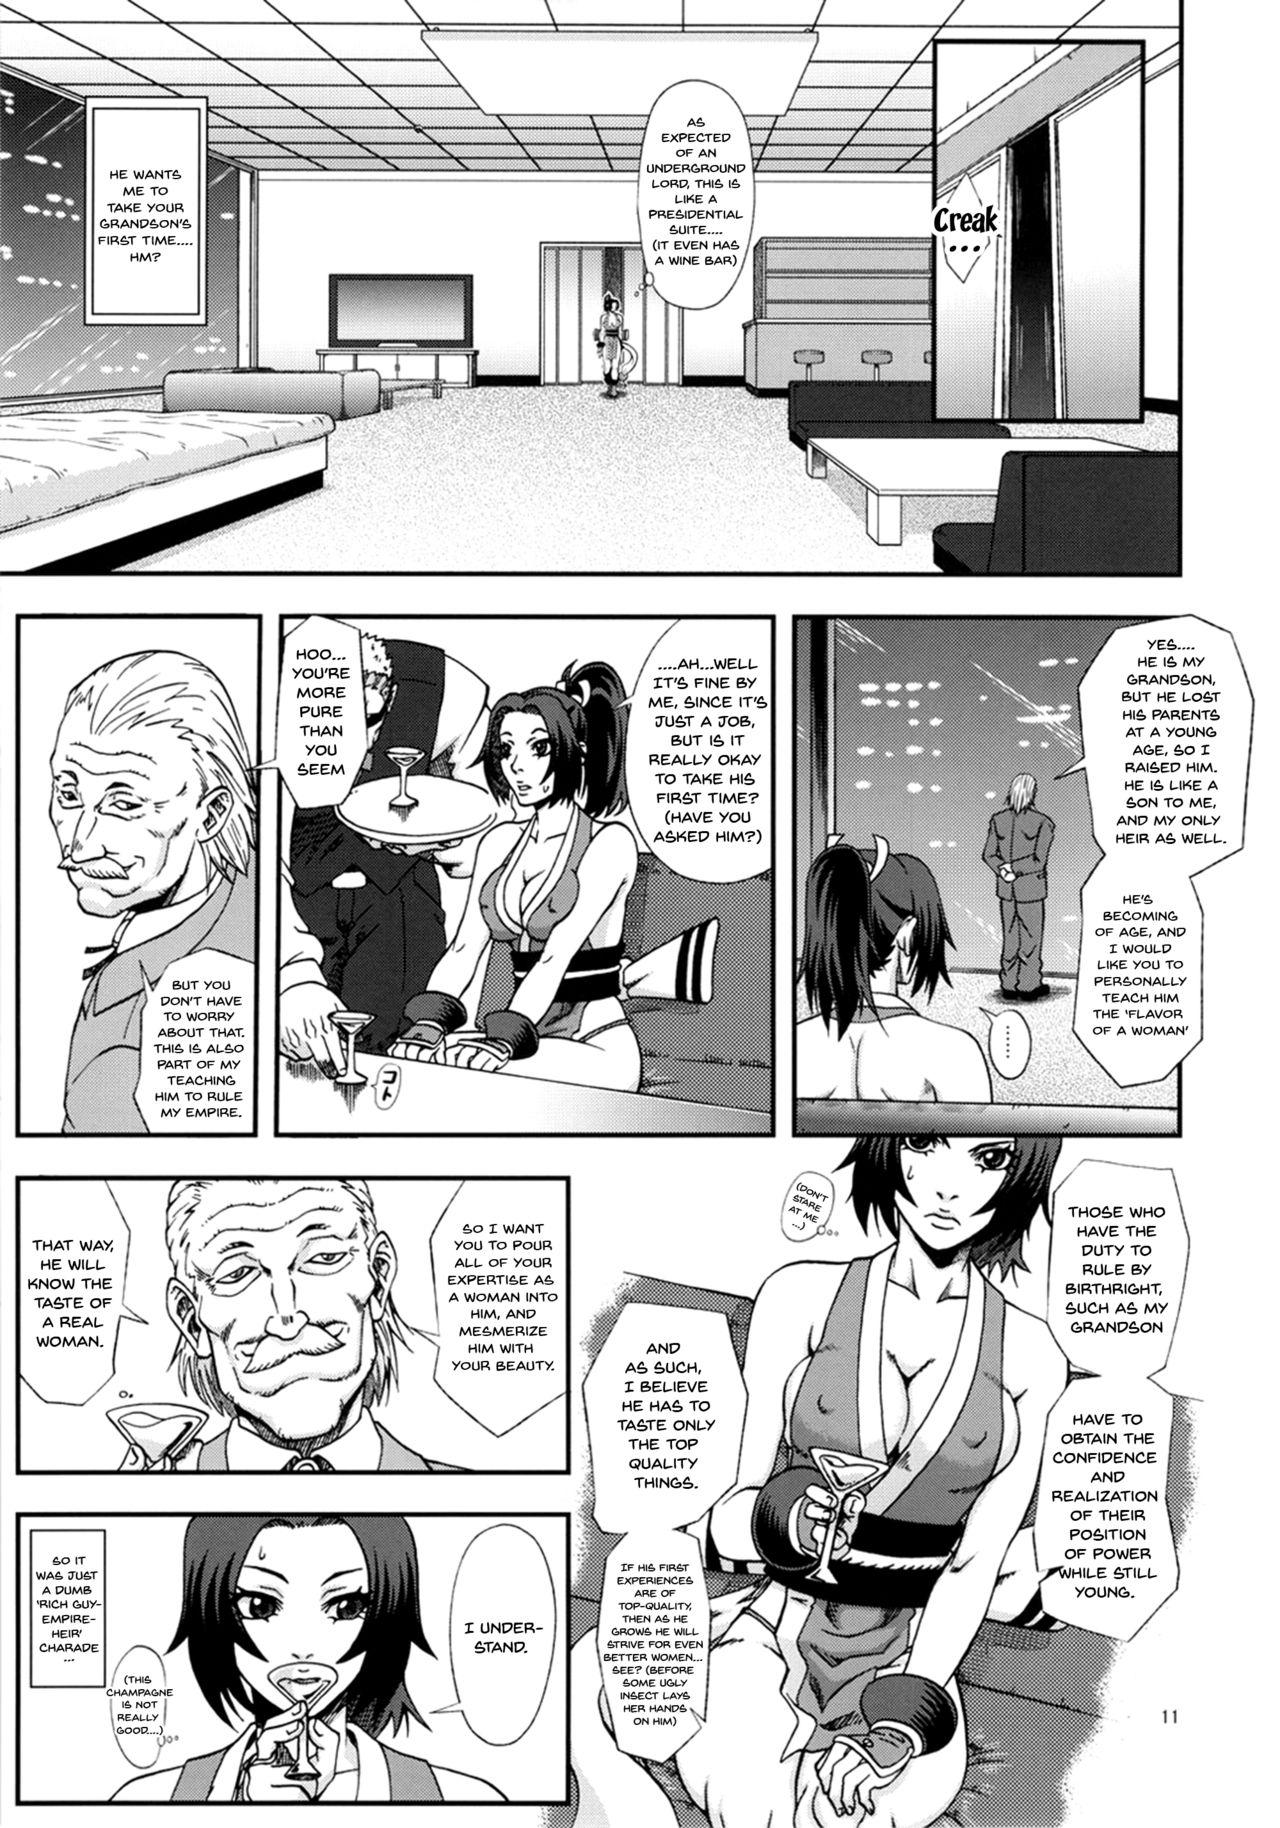 Outdoor Sex Shiranui Muzan 3 - King of fighters Homosexual - Page 10